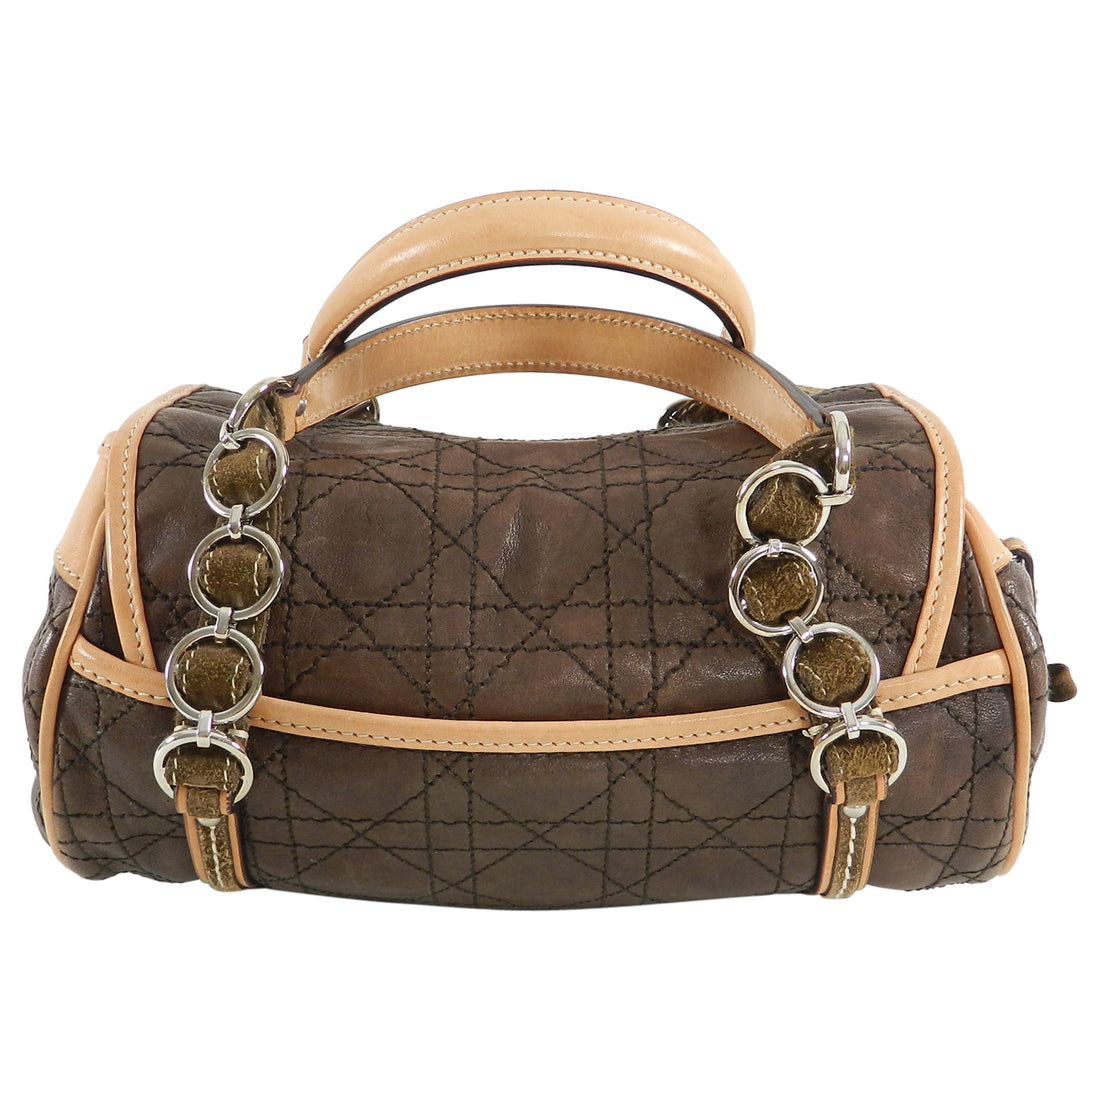 Christian Dior Brown Leather Romantique Small Bag